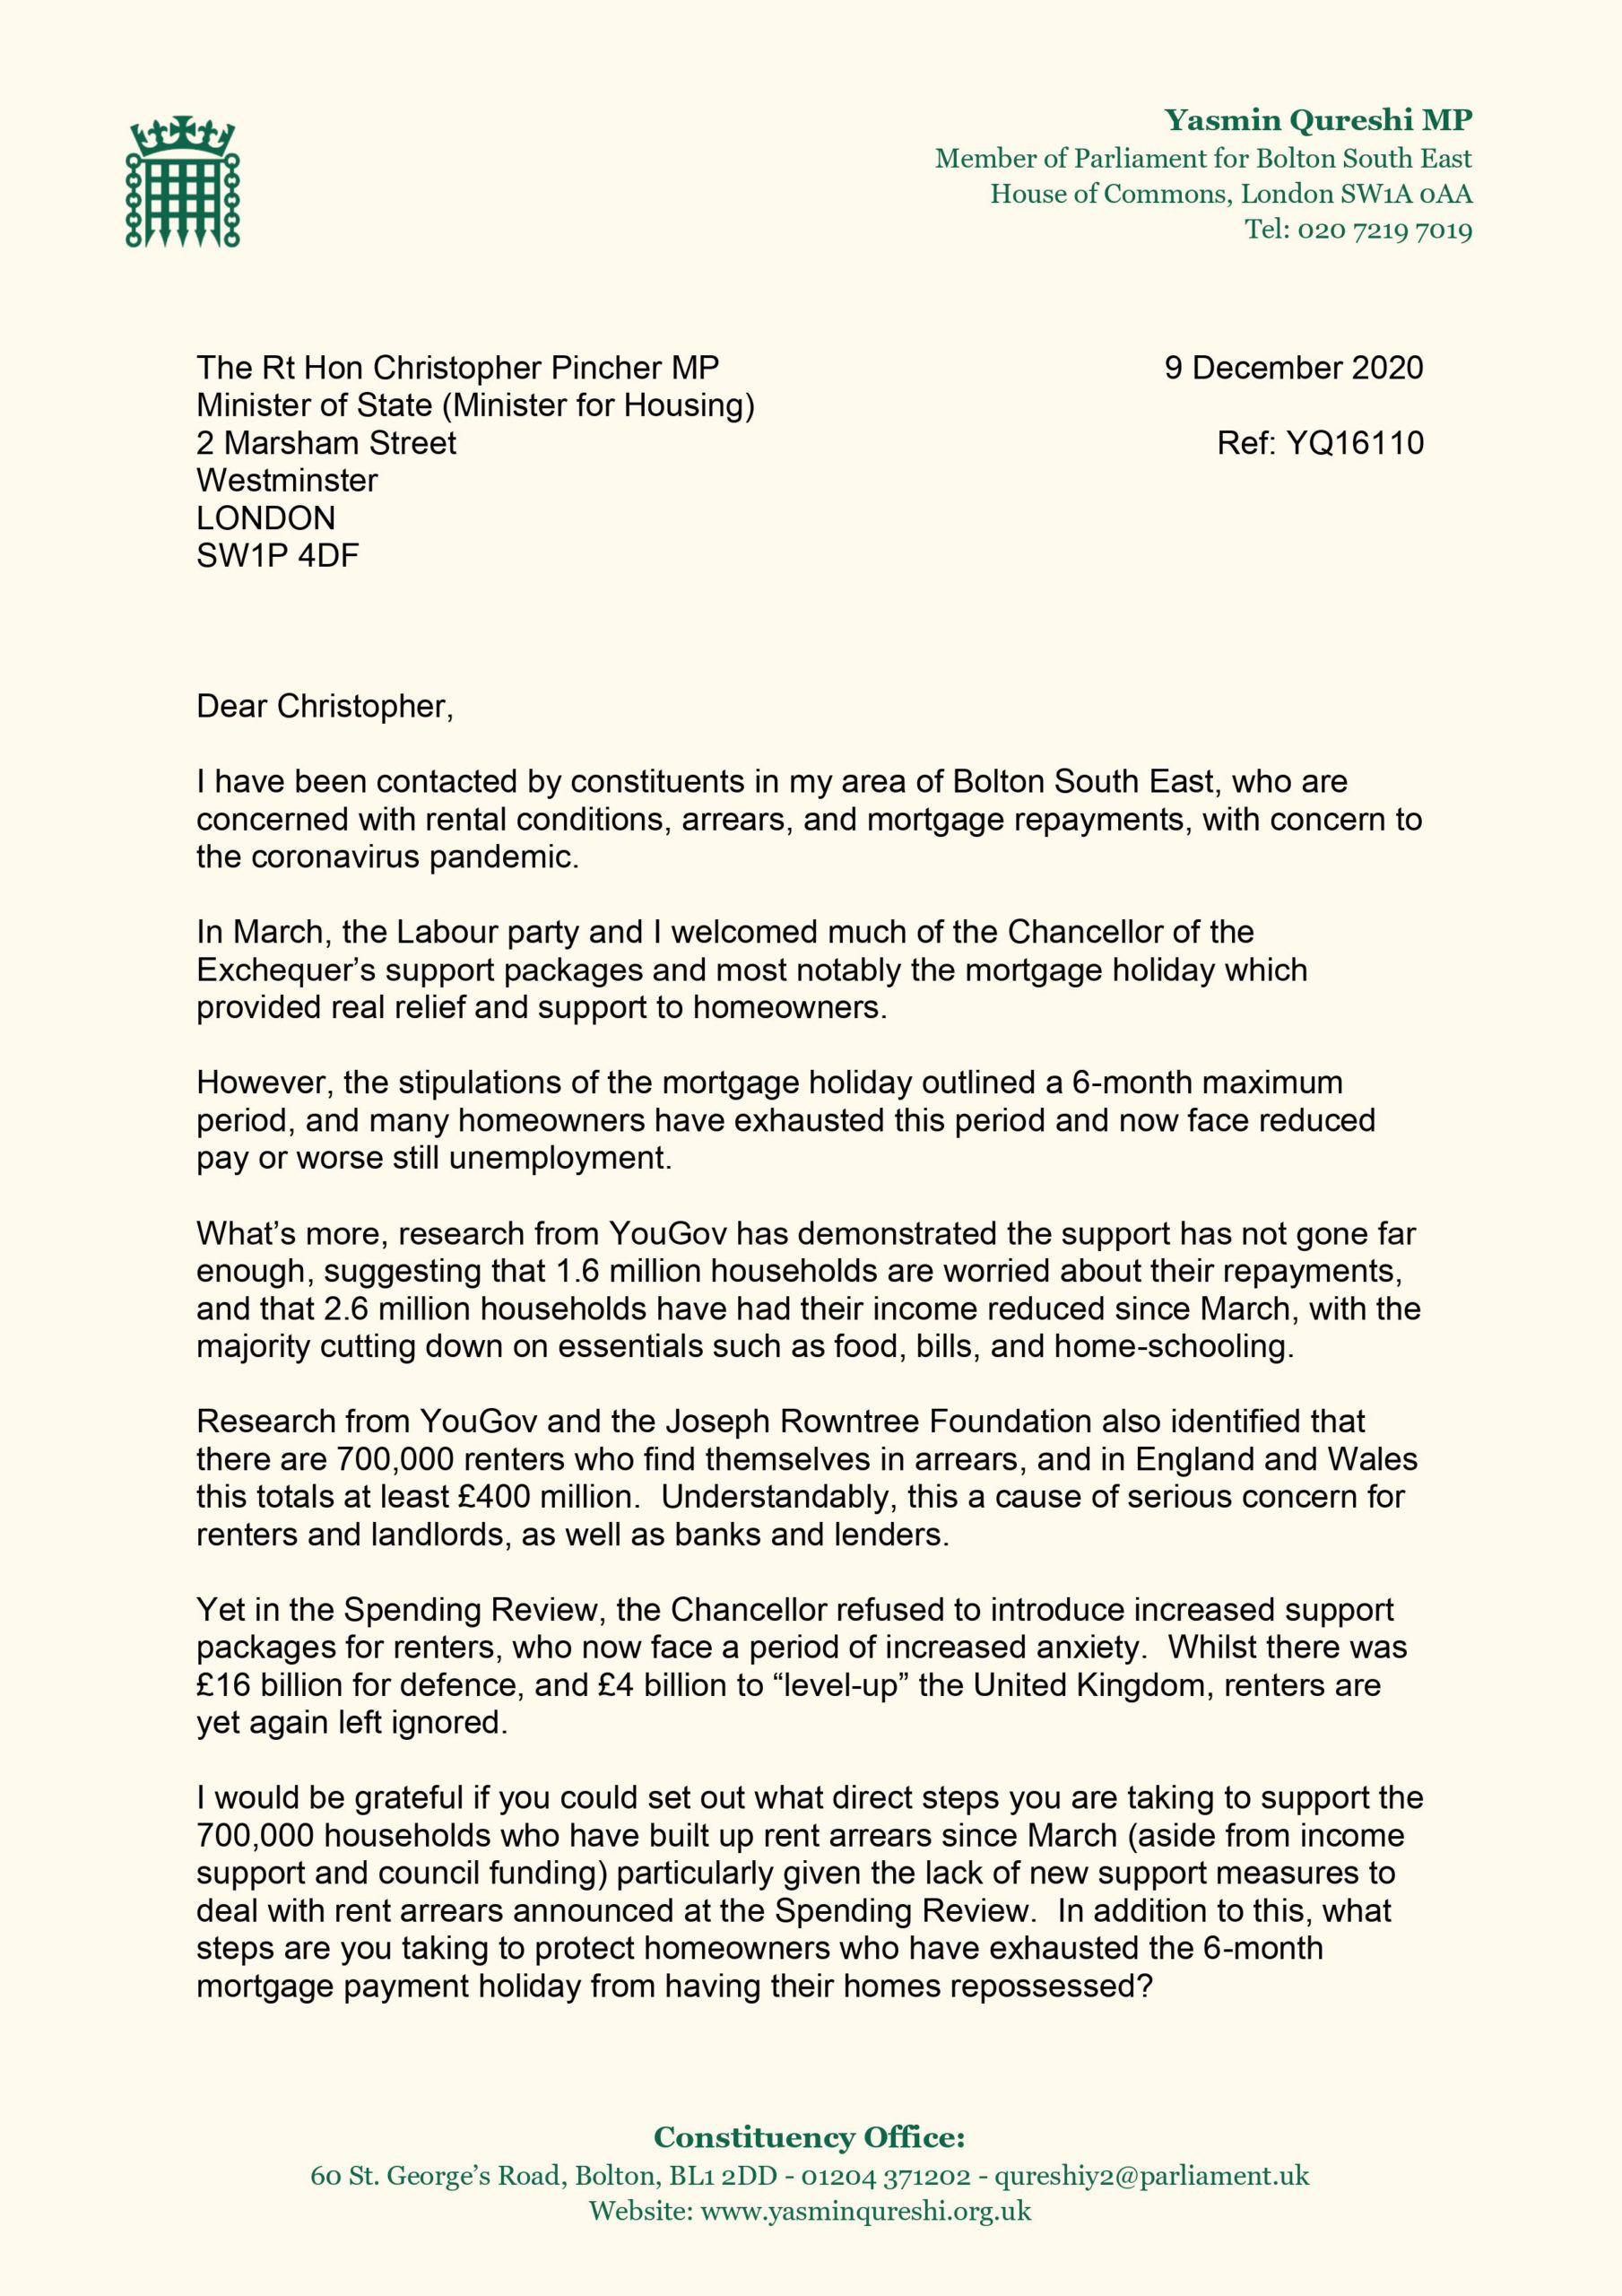 Letter to the housing minister, page 1